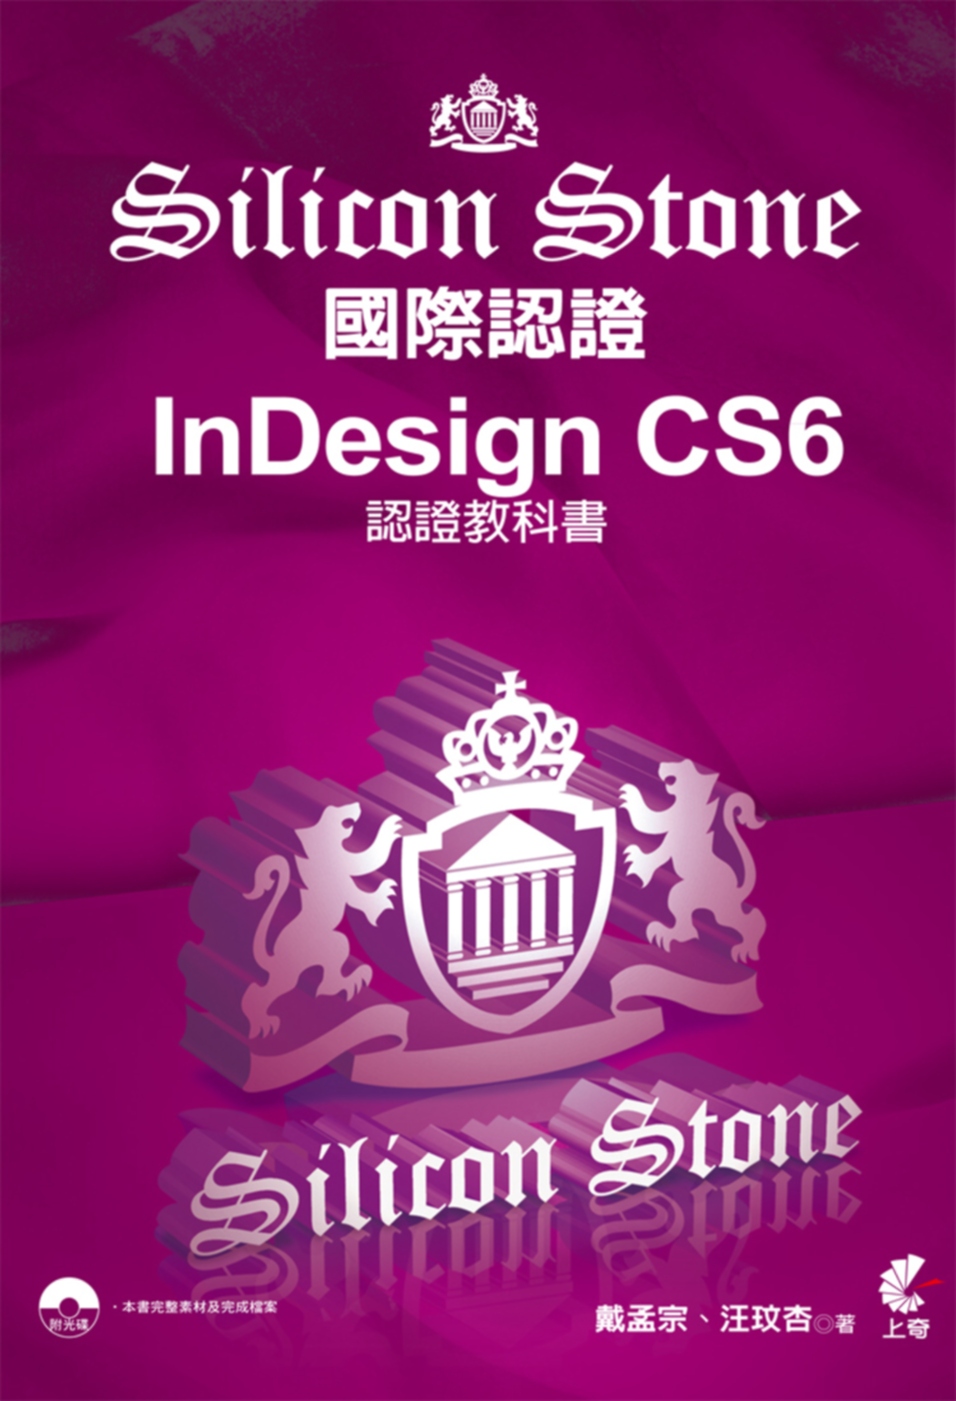 Indesign CS6 Silicon Stone 認證教科書(附光碟)